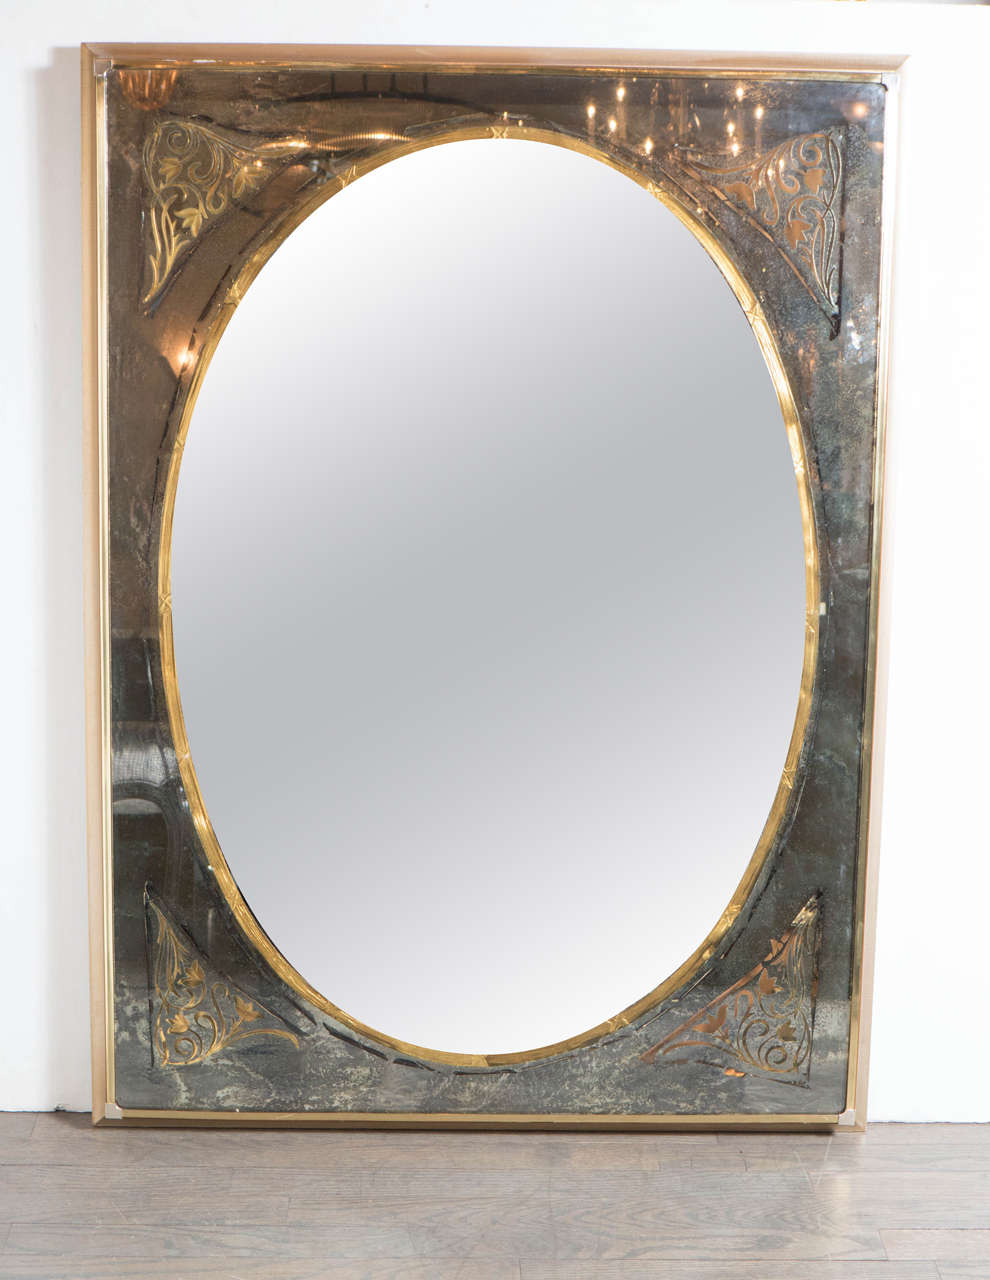 This elegant Mid-Century Modernist mirror in the manner of Jansen features reverse eglomise stylized floral and scroll detailing in each corner, a clear oval mirror center with gilt surround with 